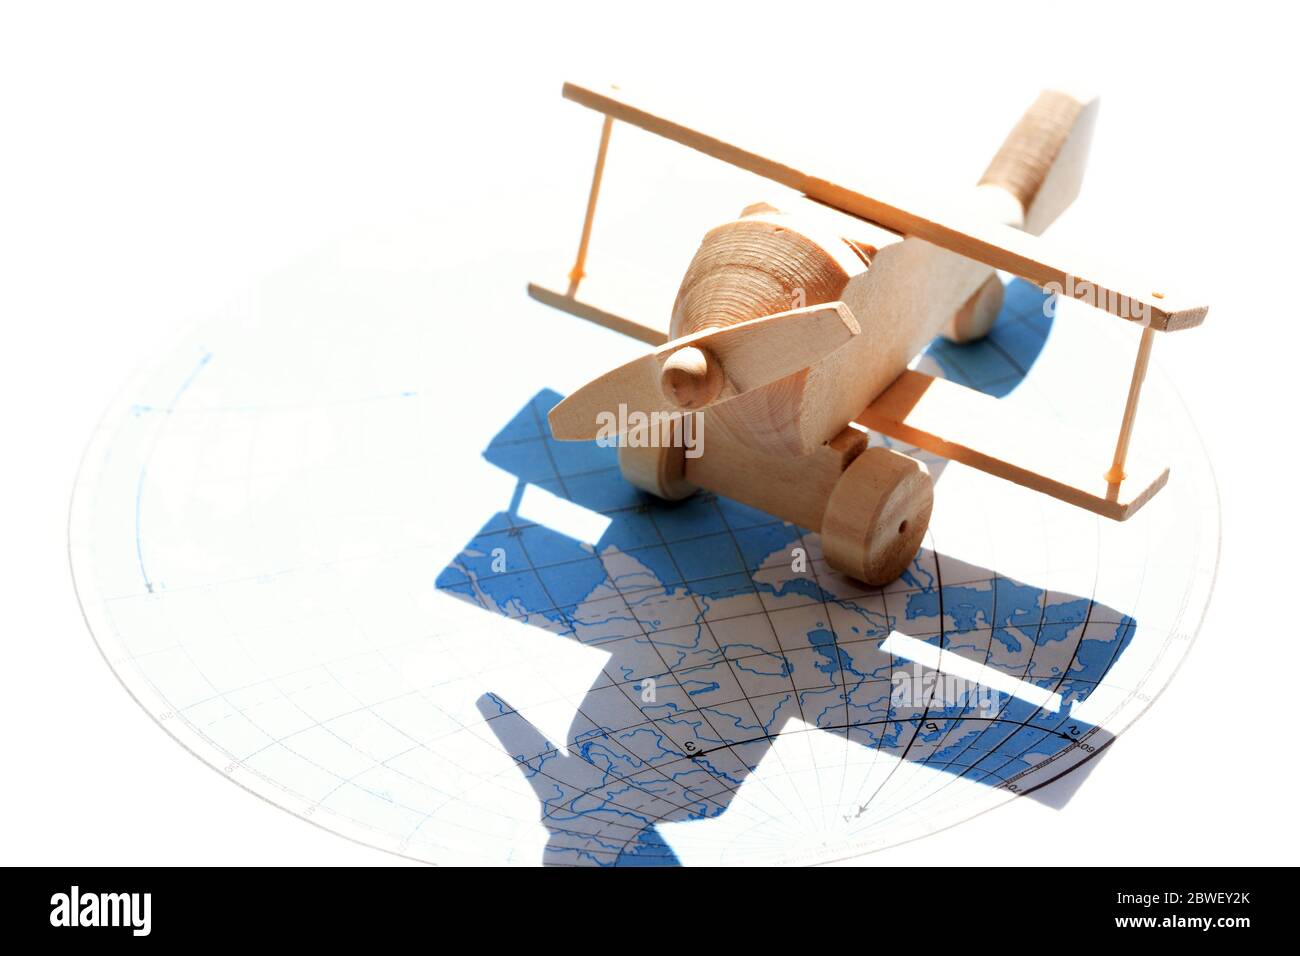 Travel concept. Small wooden airplane against sunlight with map as shadow Stock Photo